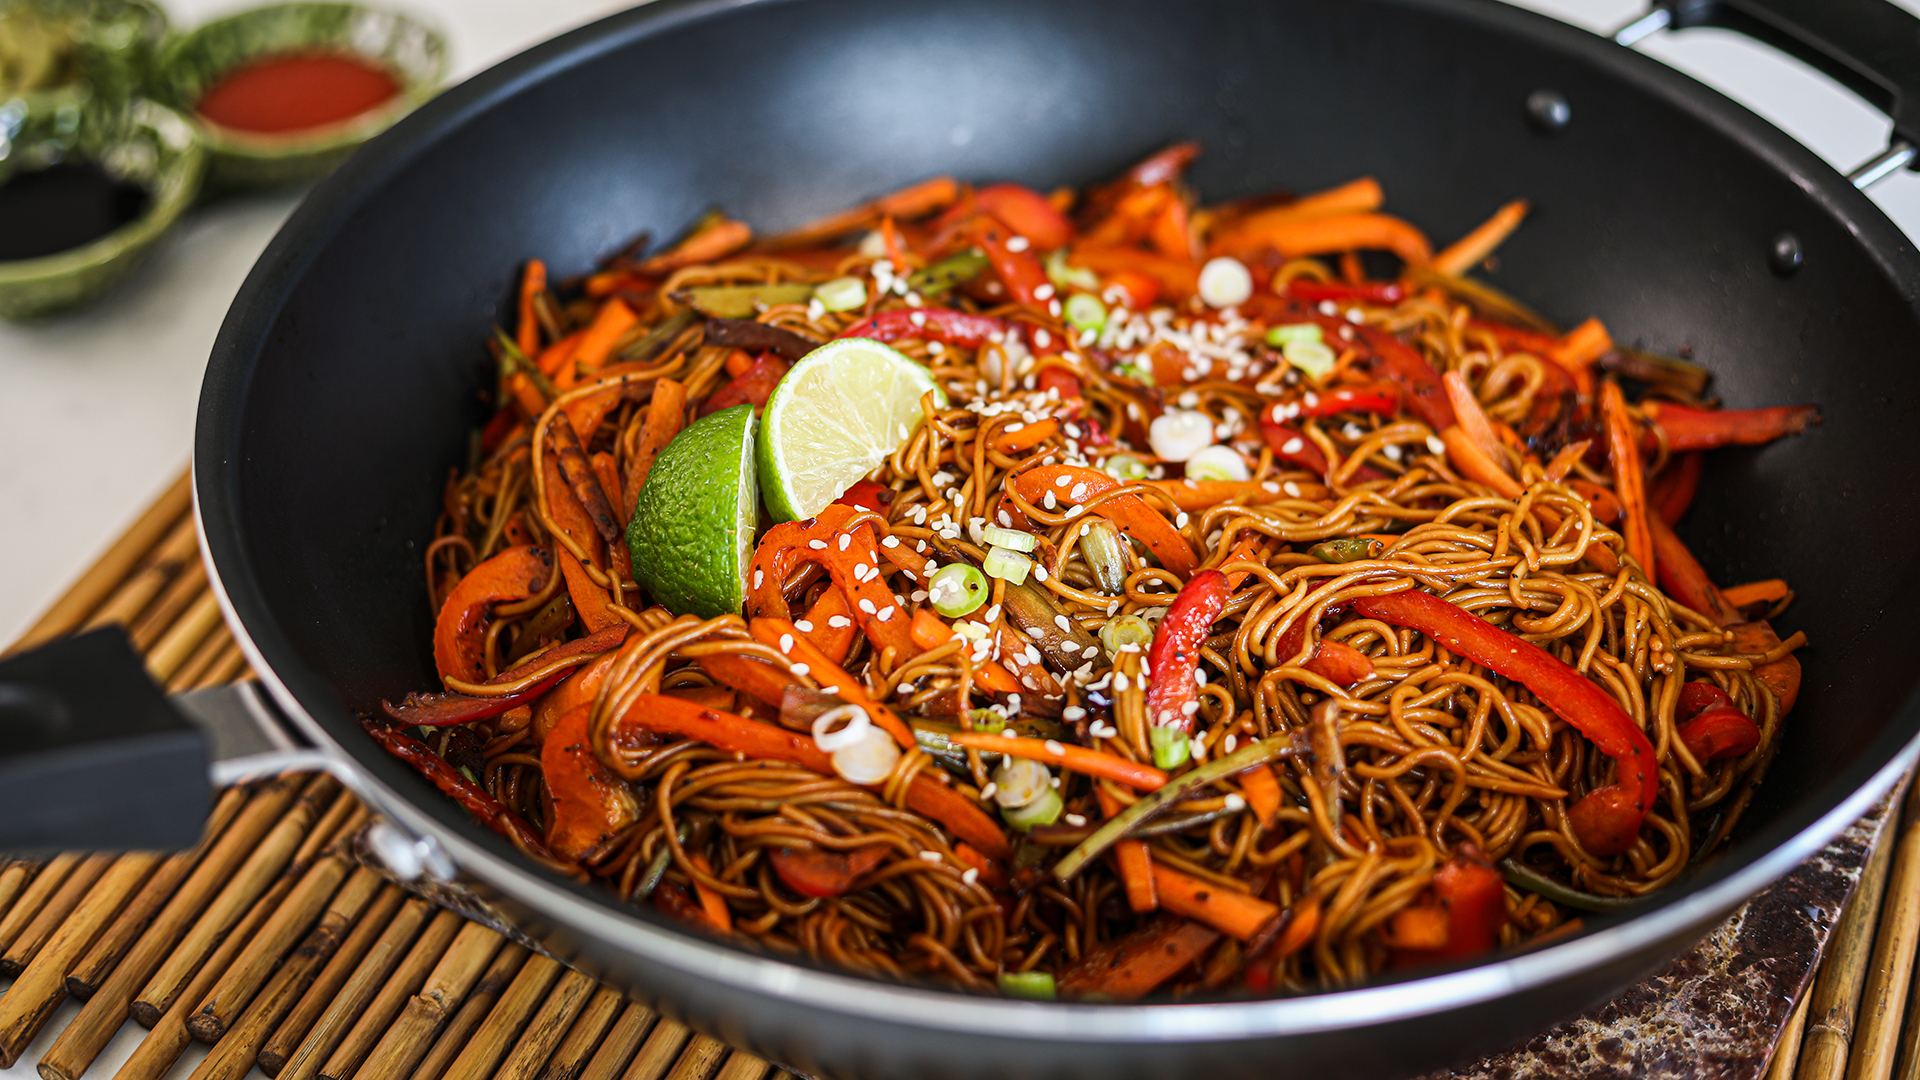 Spicy veg noodles in 20 minutes